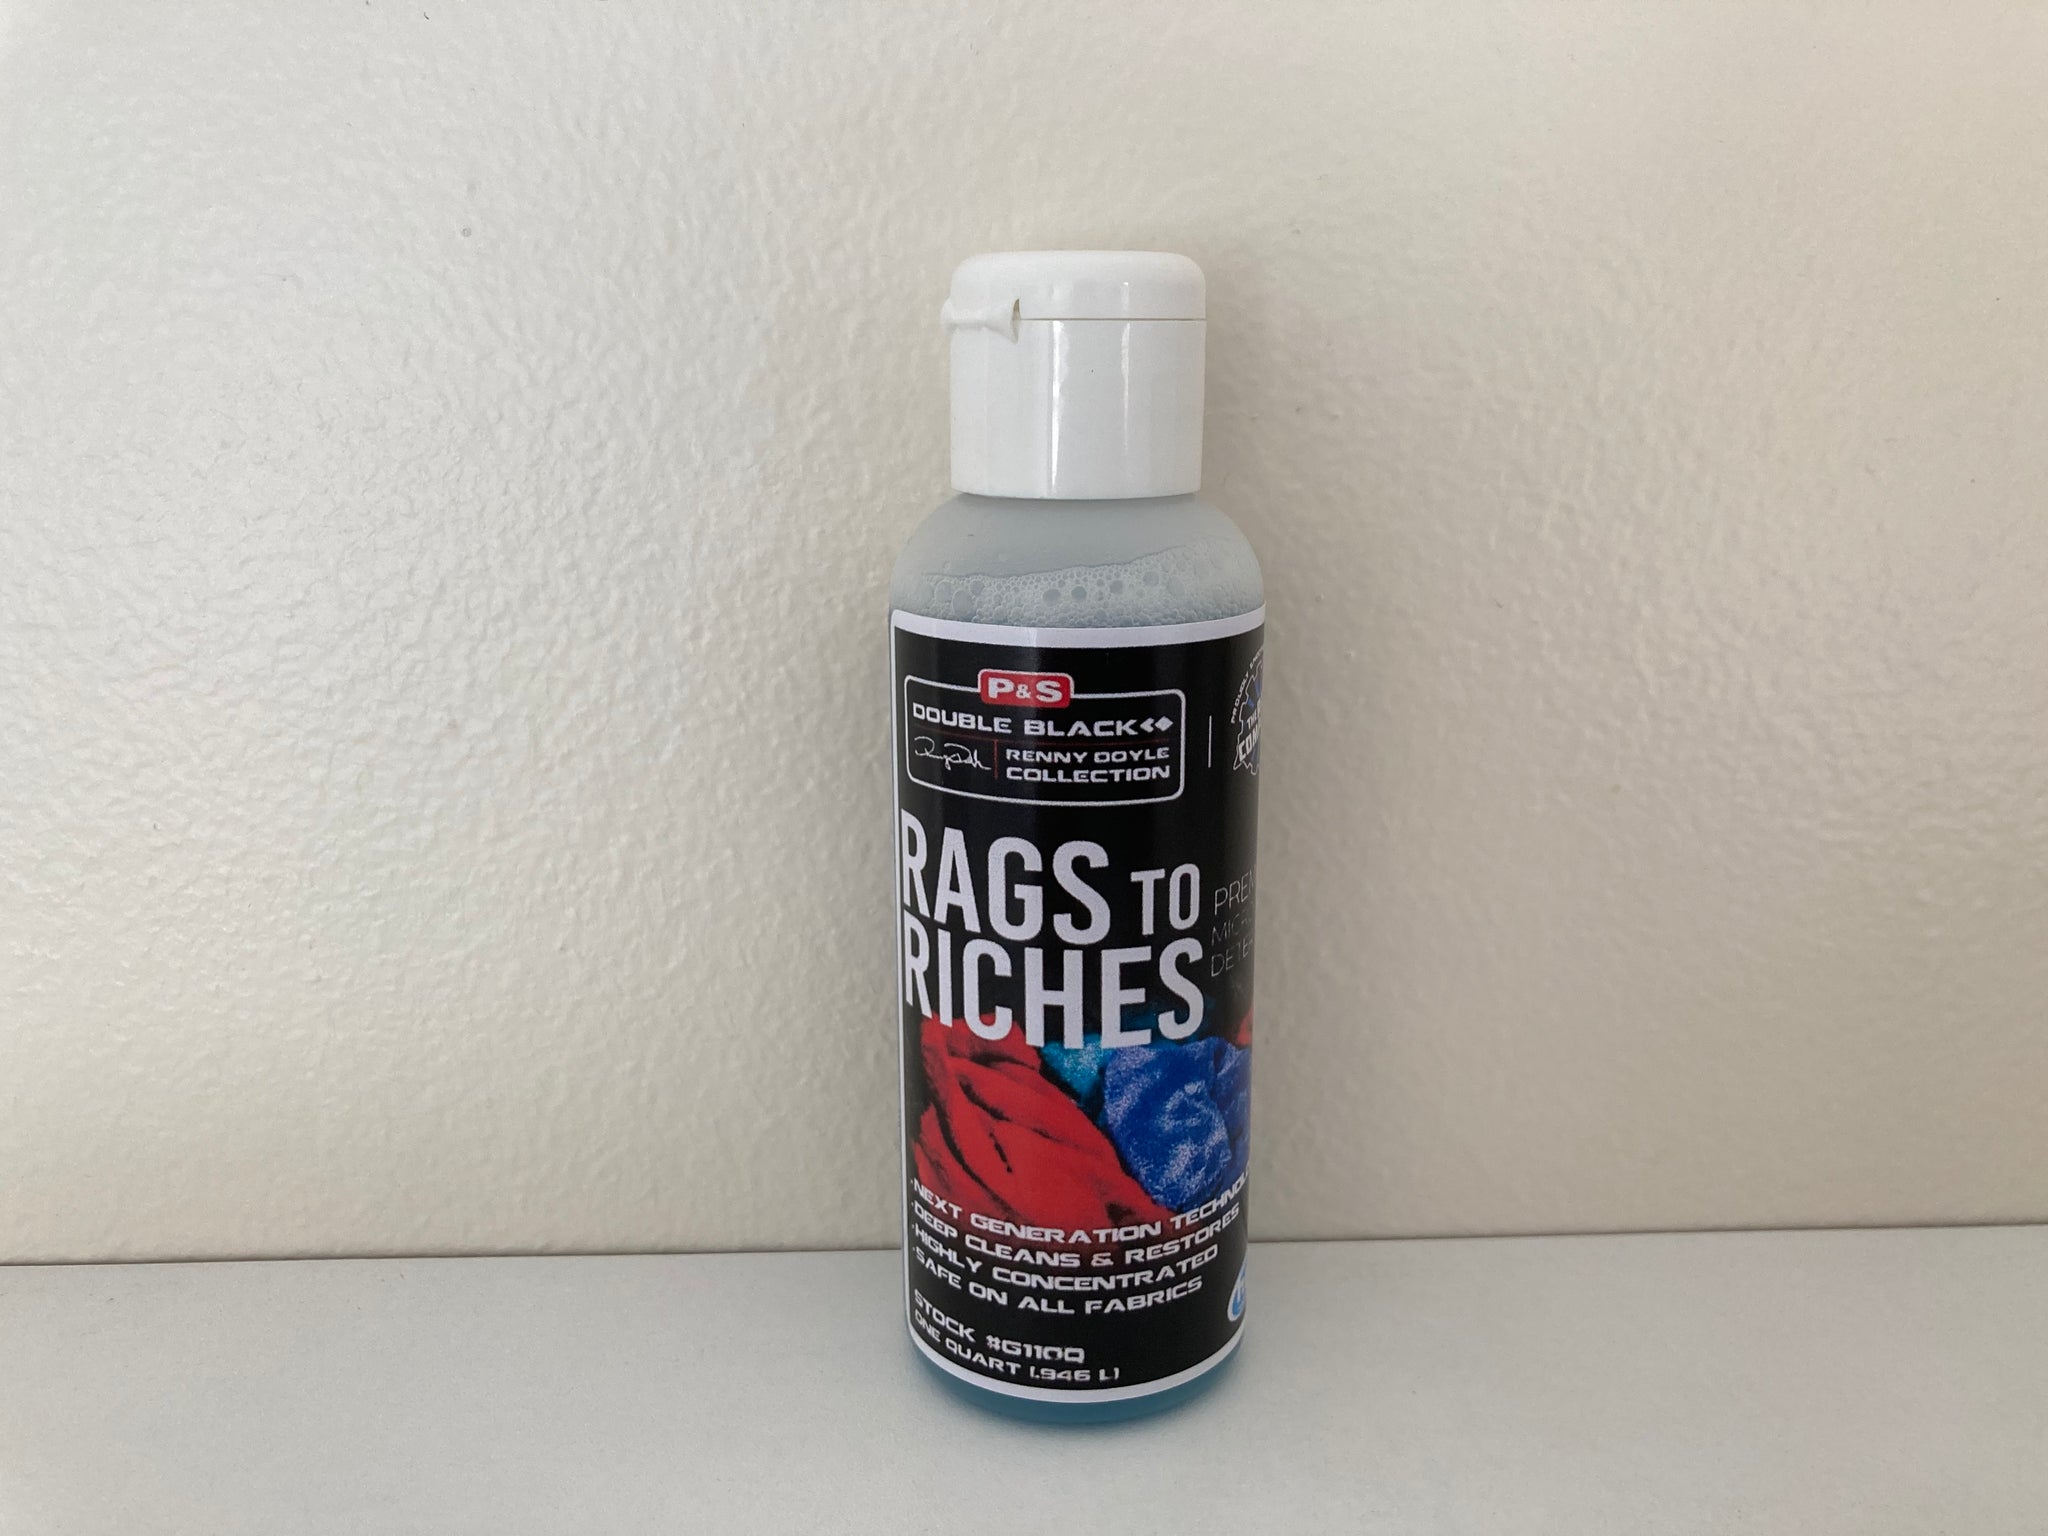 P&S Rags to Riches Microfiber Detergent – G Shift (Pty) Ltd